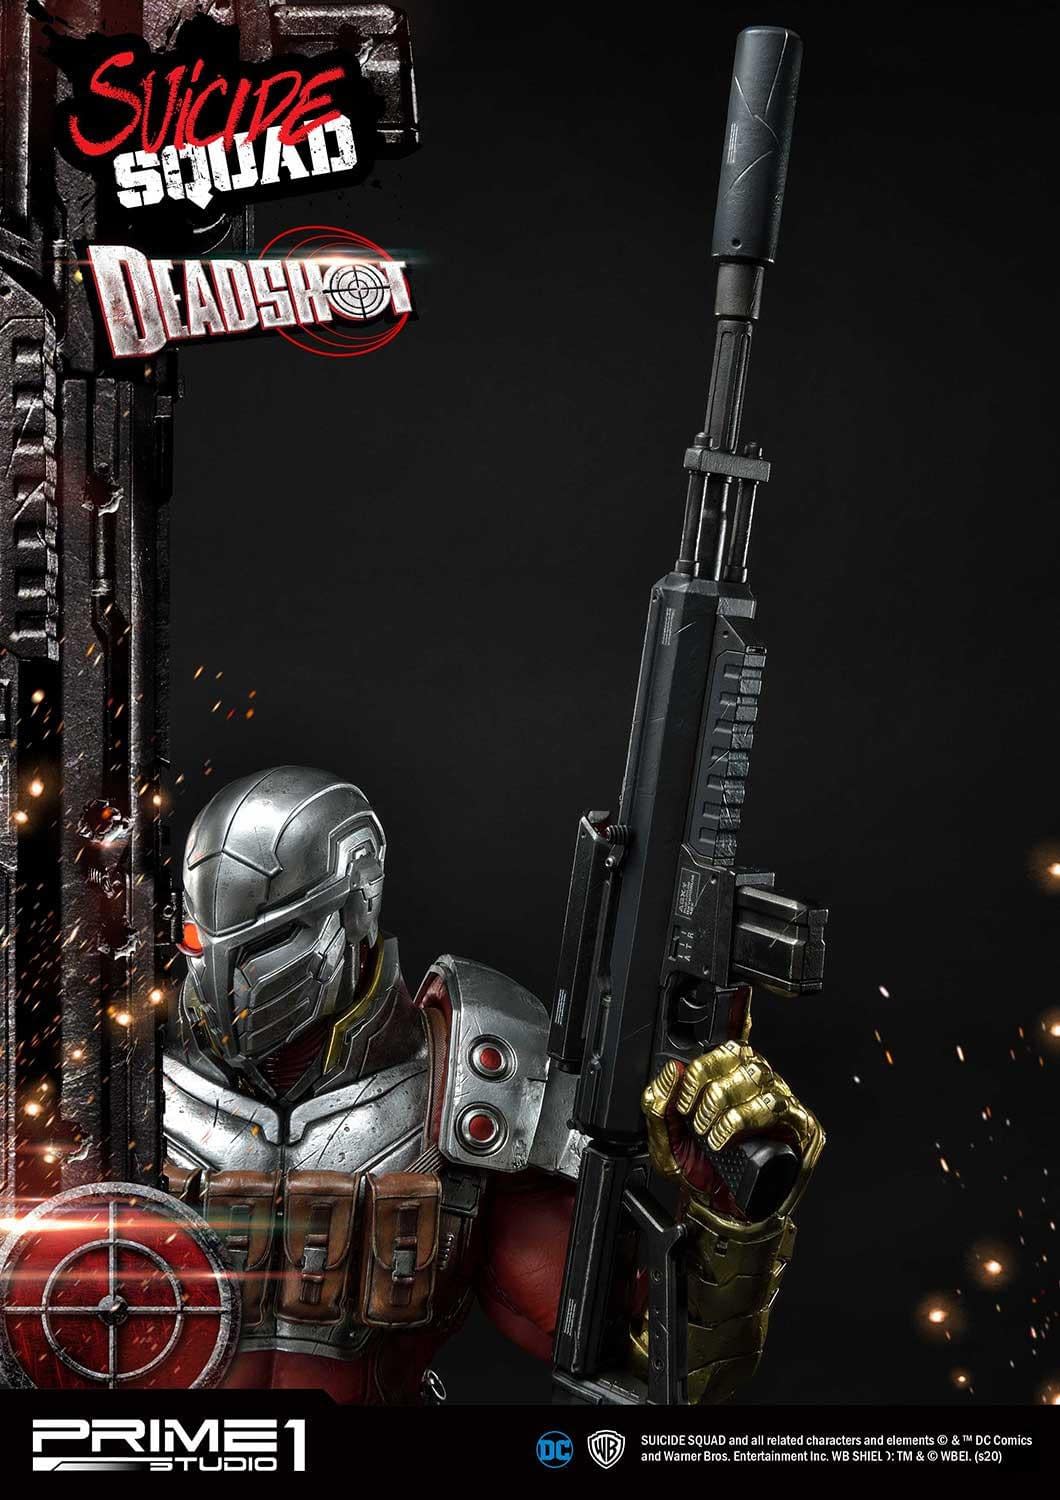 Deadshot Is Locked and Loaded With New Prime 1 Studio Statue 